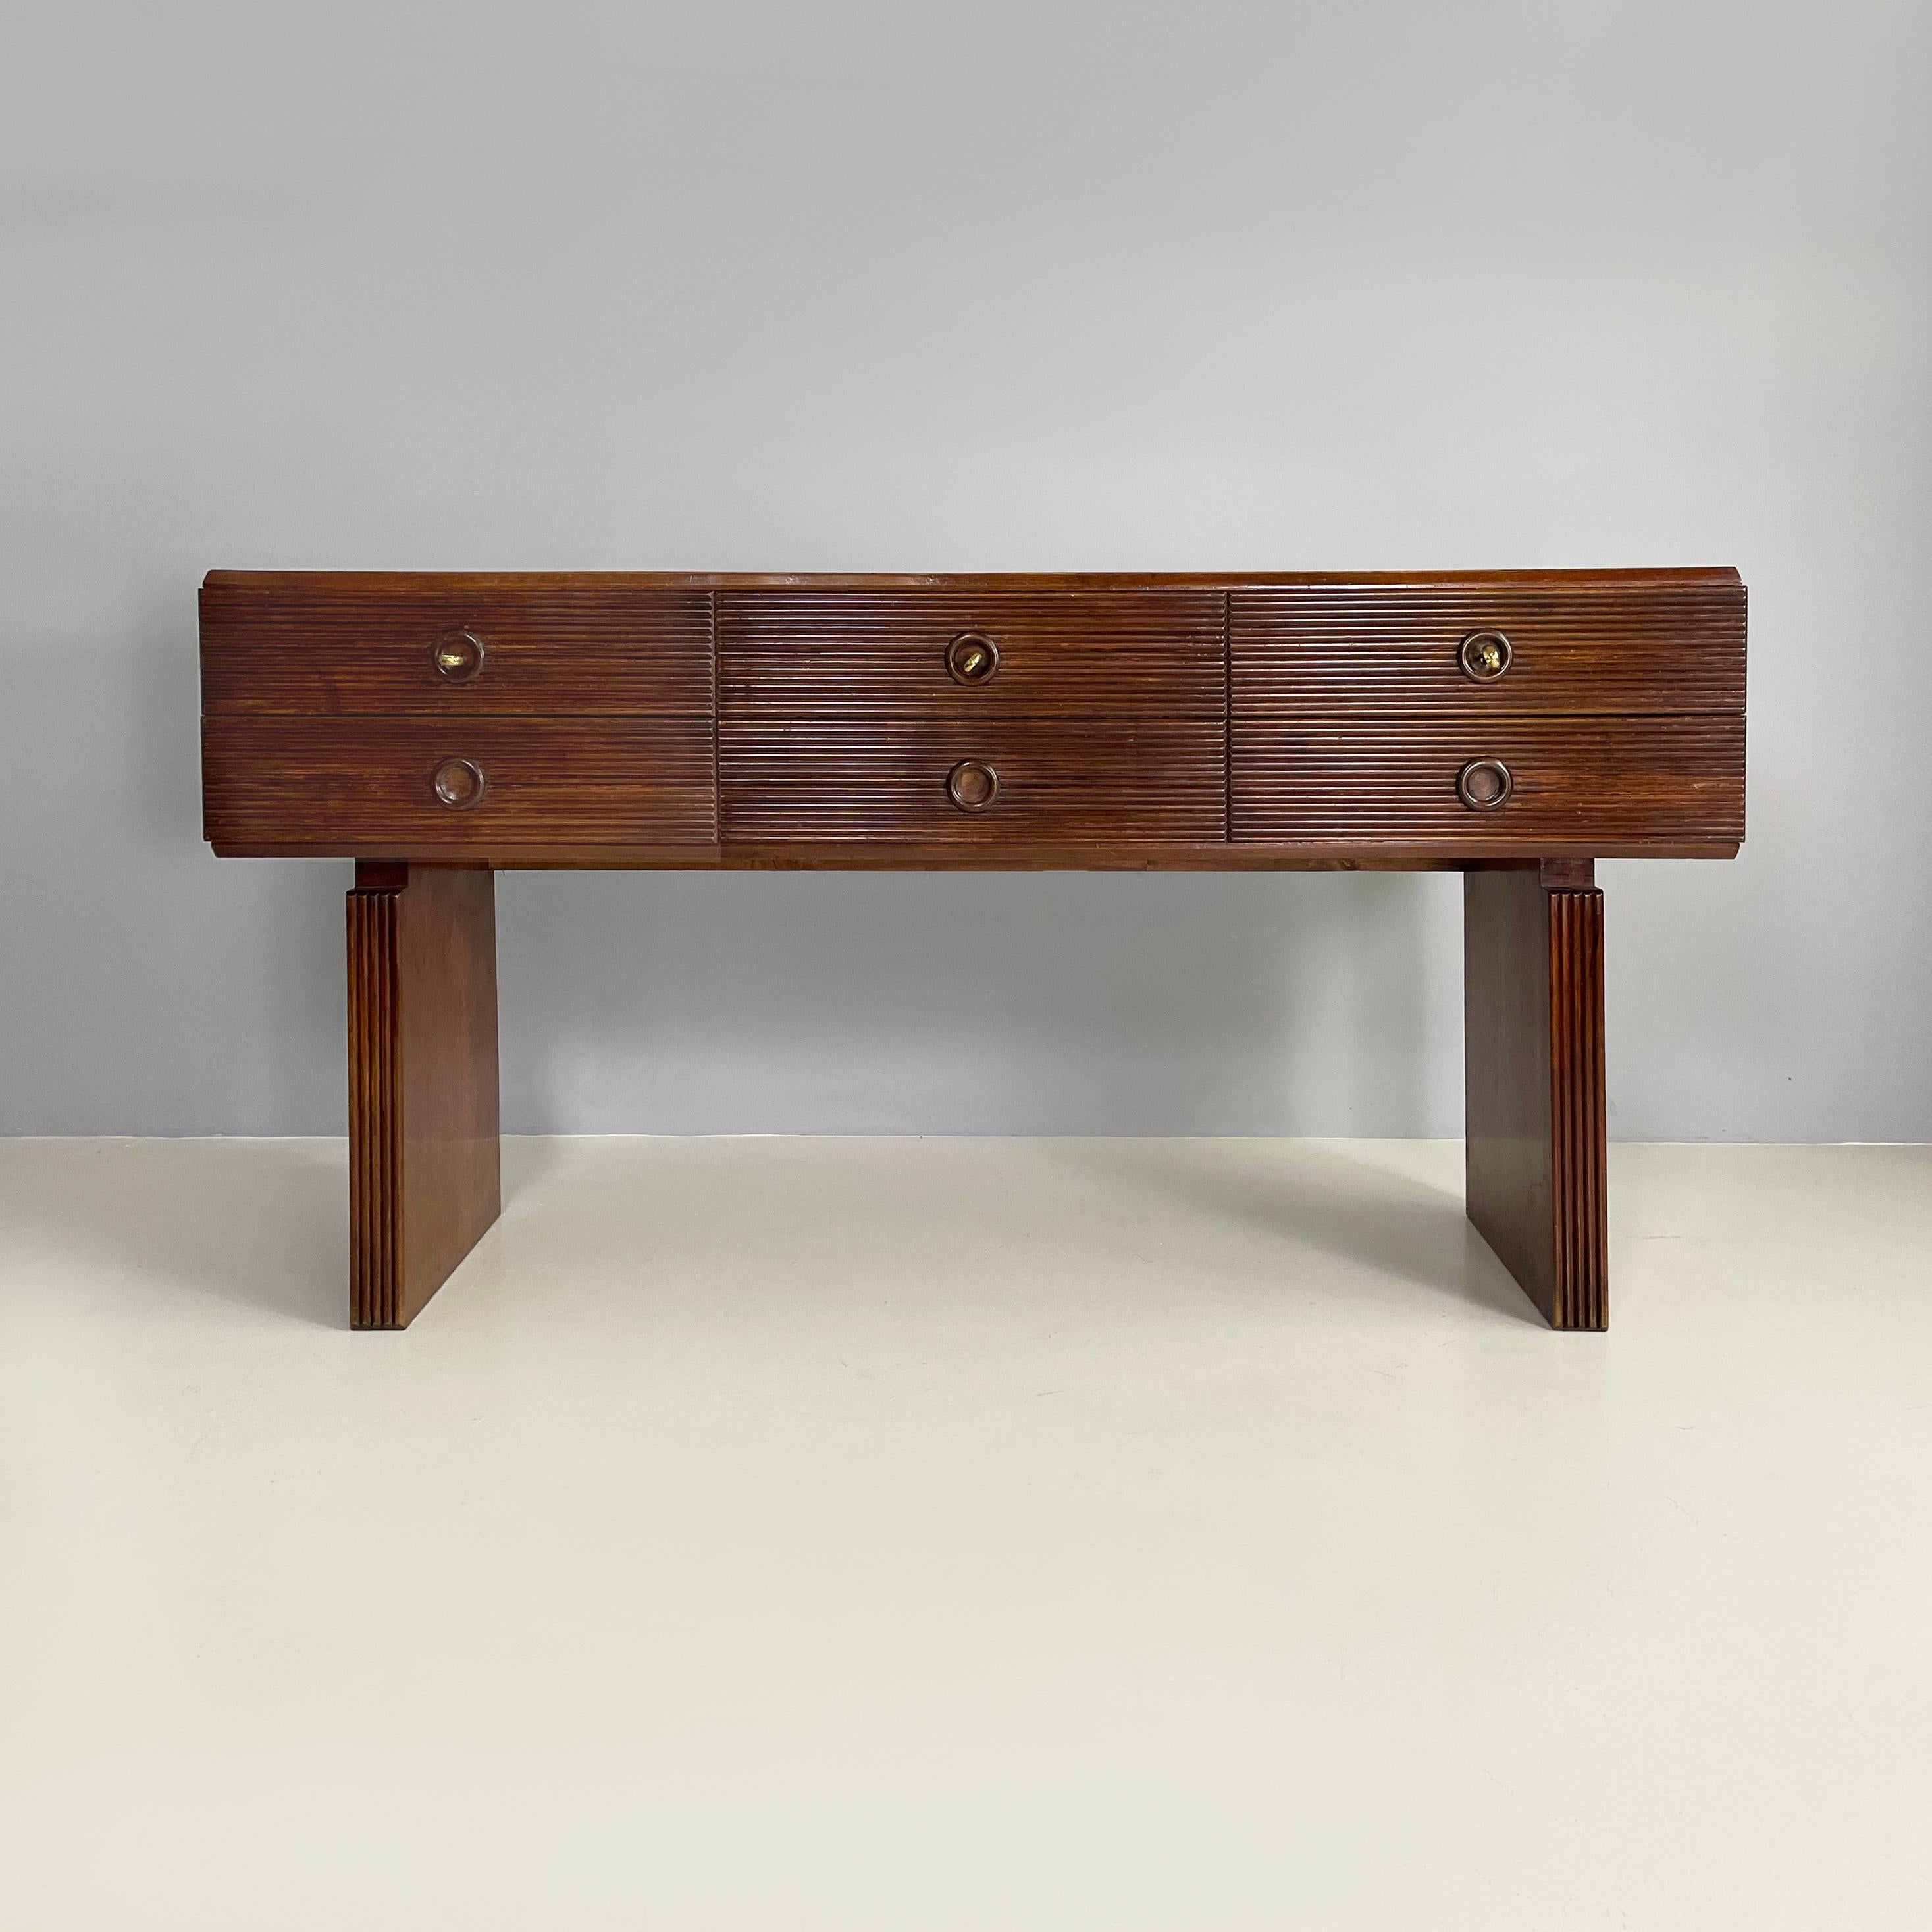 Italian Art Deco wooden sideboard with six drawers by Gio Ponti, 1940s 
Sideboard with rectangular wooden top. It has six striped wood drawers with each a hole with a turned wooden frame that acts as a handle. The three upper drawers have working